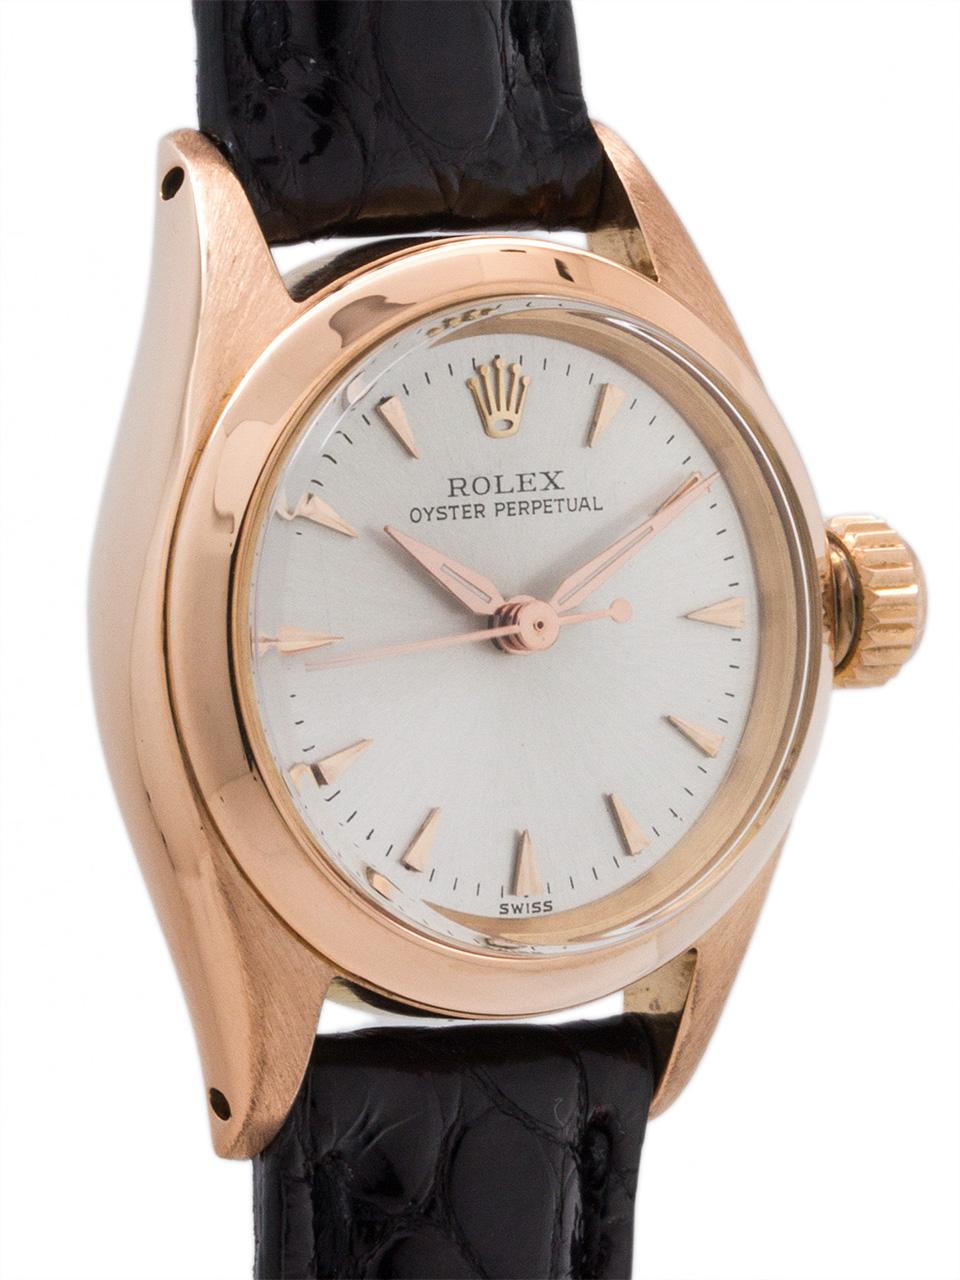 Lady’s Rolex 18 Karat Rose Gold Oyster Perpetual Ref 6619, circa 1960 In Excellent Condition For Sale In West Hollywood, CA